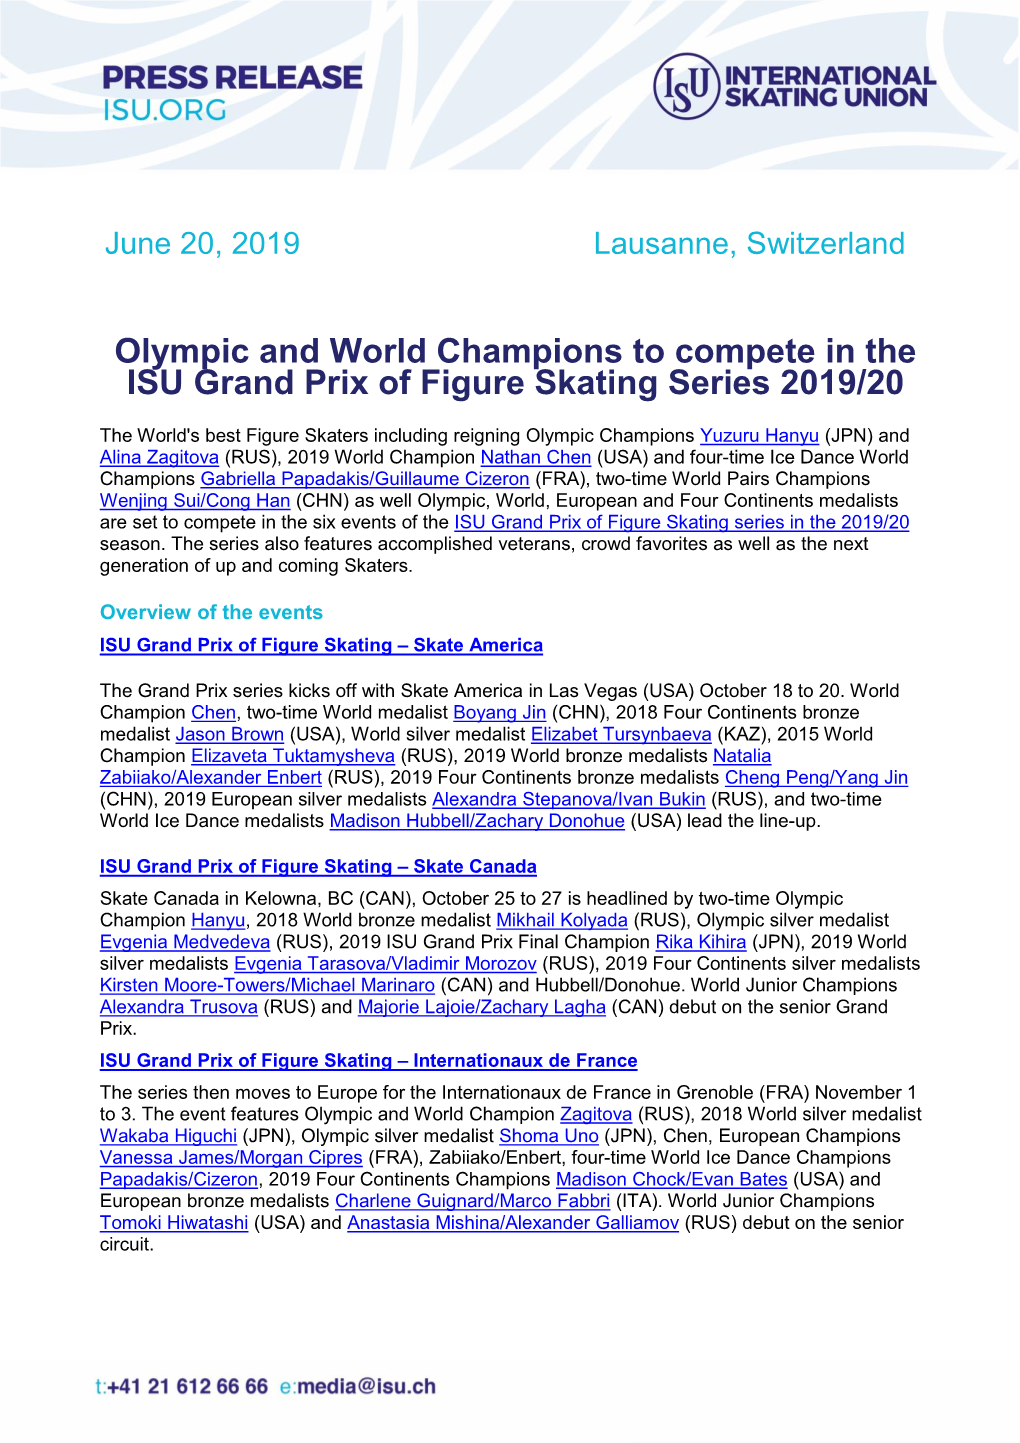 Olympic and World Champions to Compete in the ISU Grand Prix of Figure Skating Series 2019/20